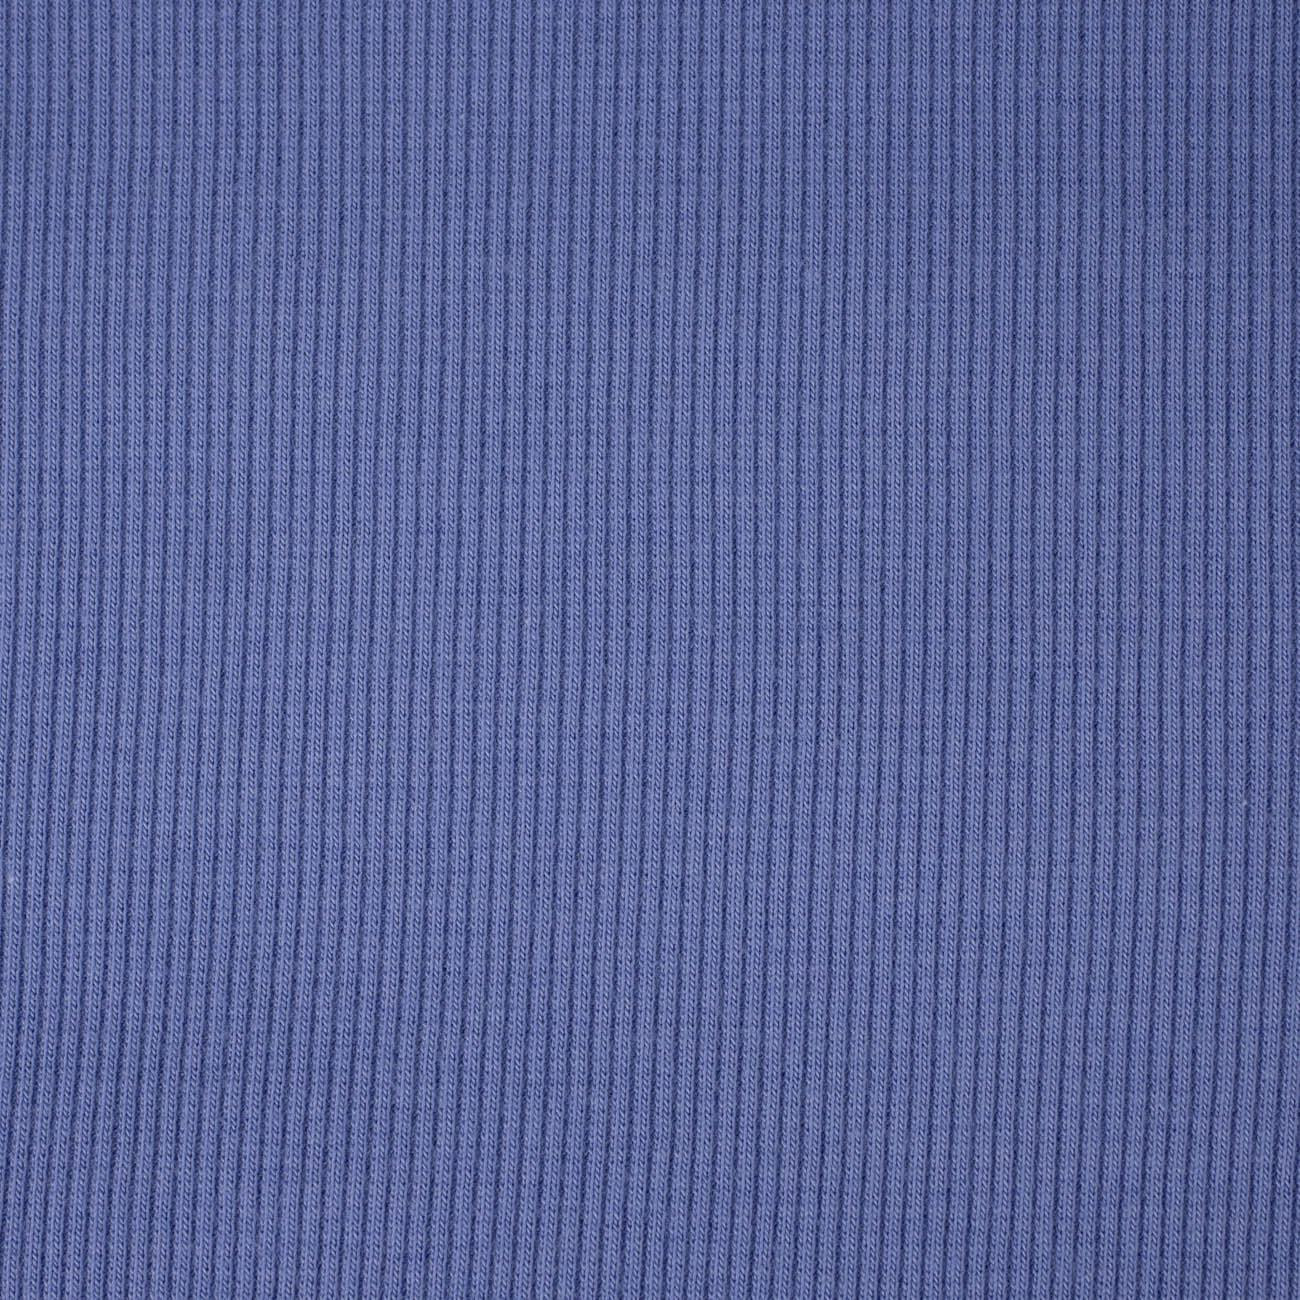 D-123 PURPLE - Ribbed knit fabric